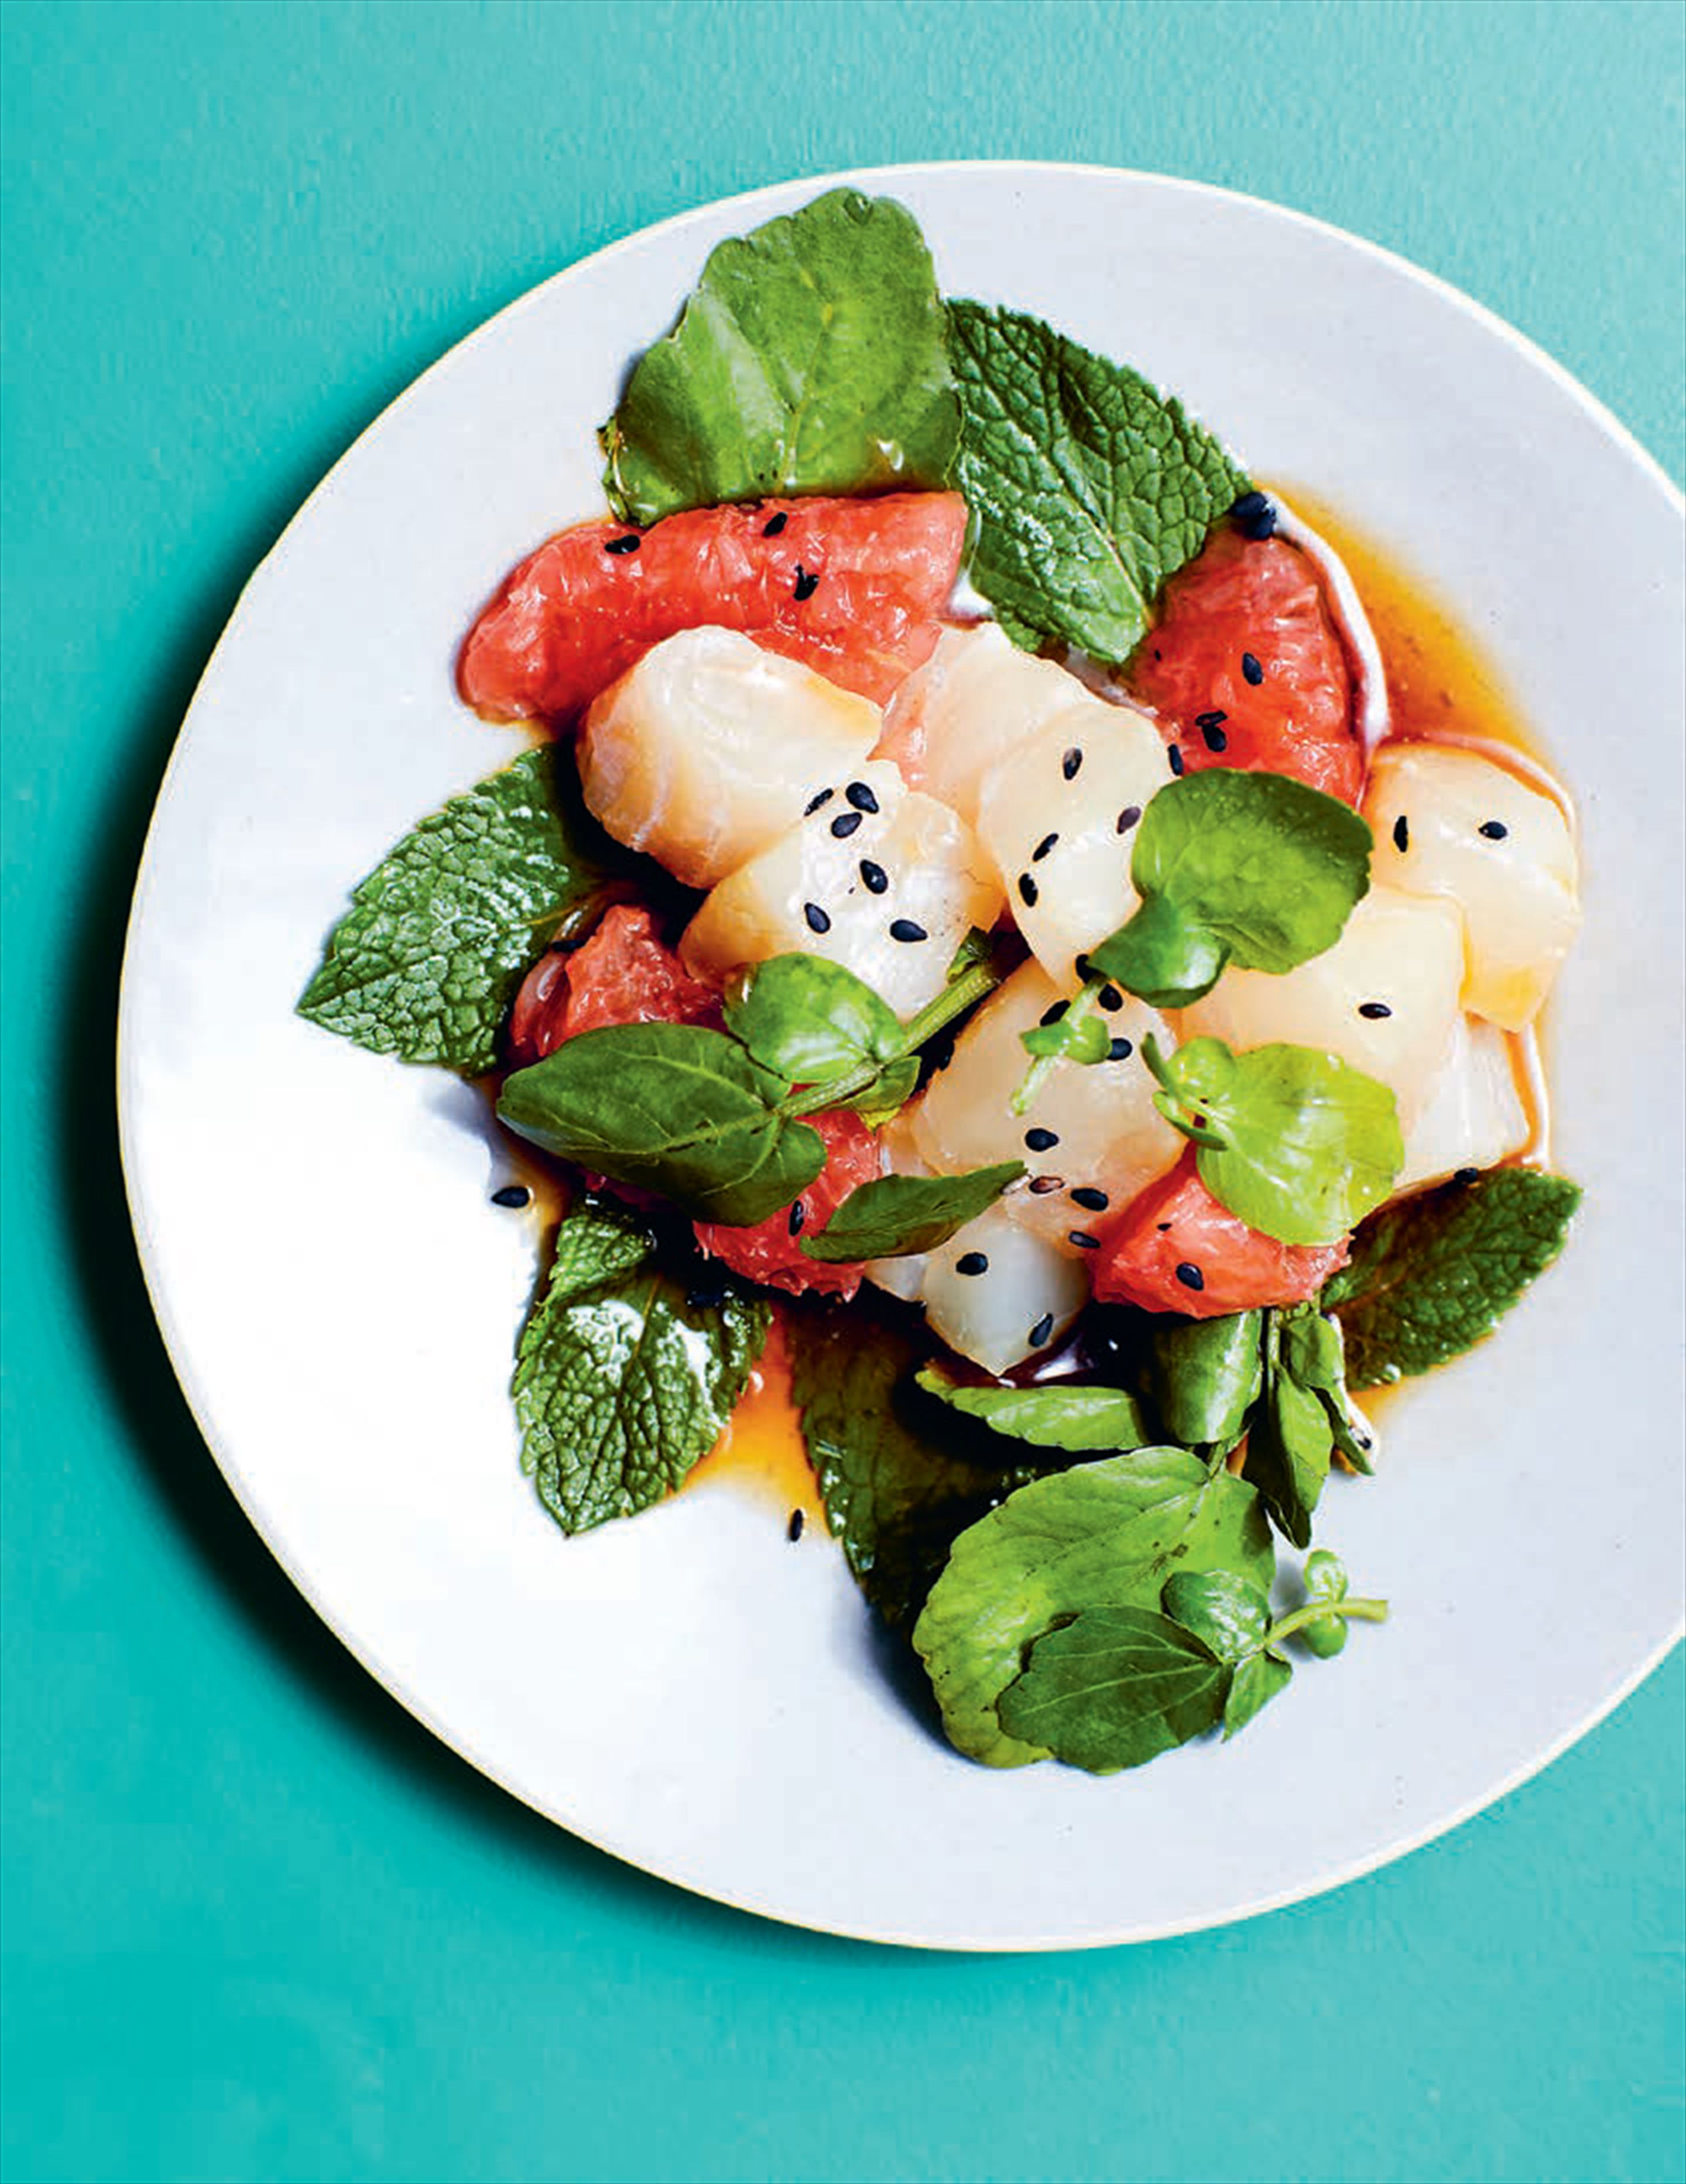 Sour sea bass with grapefruit, mint + baby watercress in a ponzu dressing